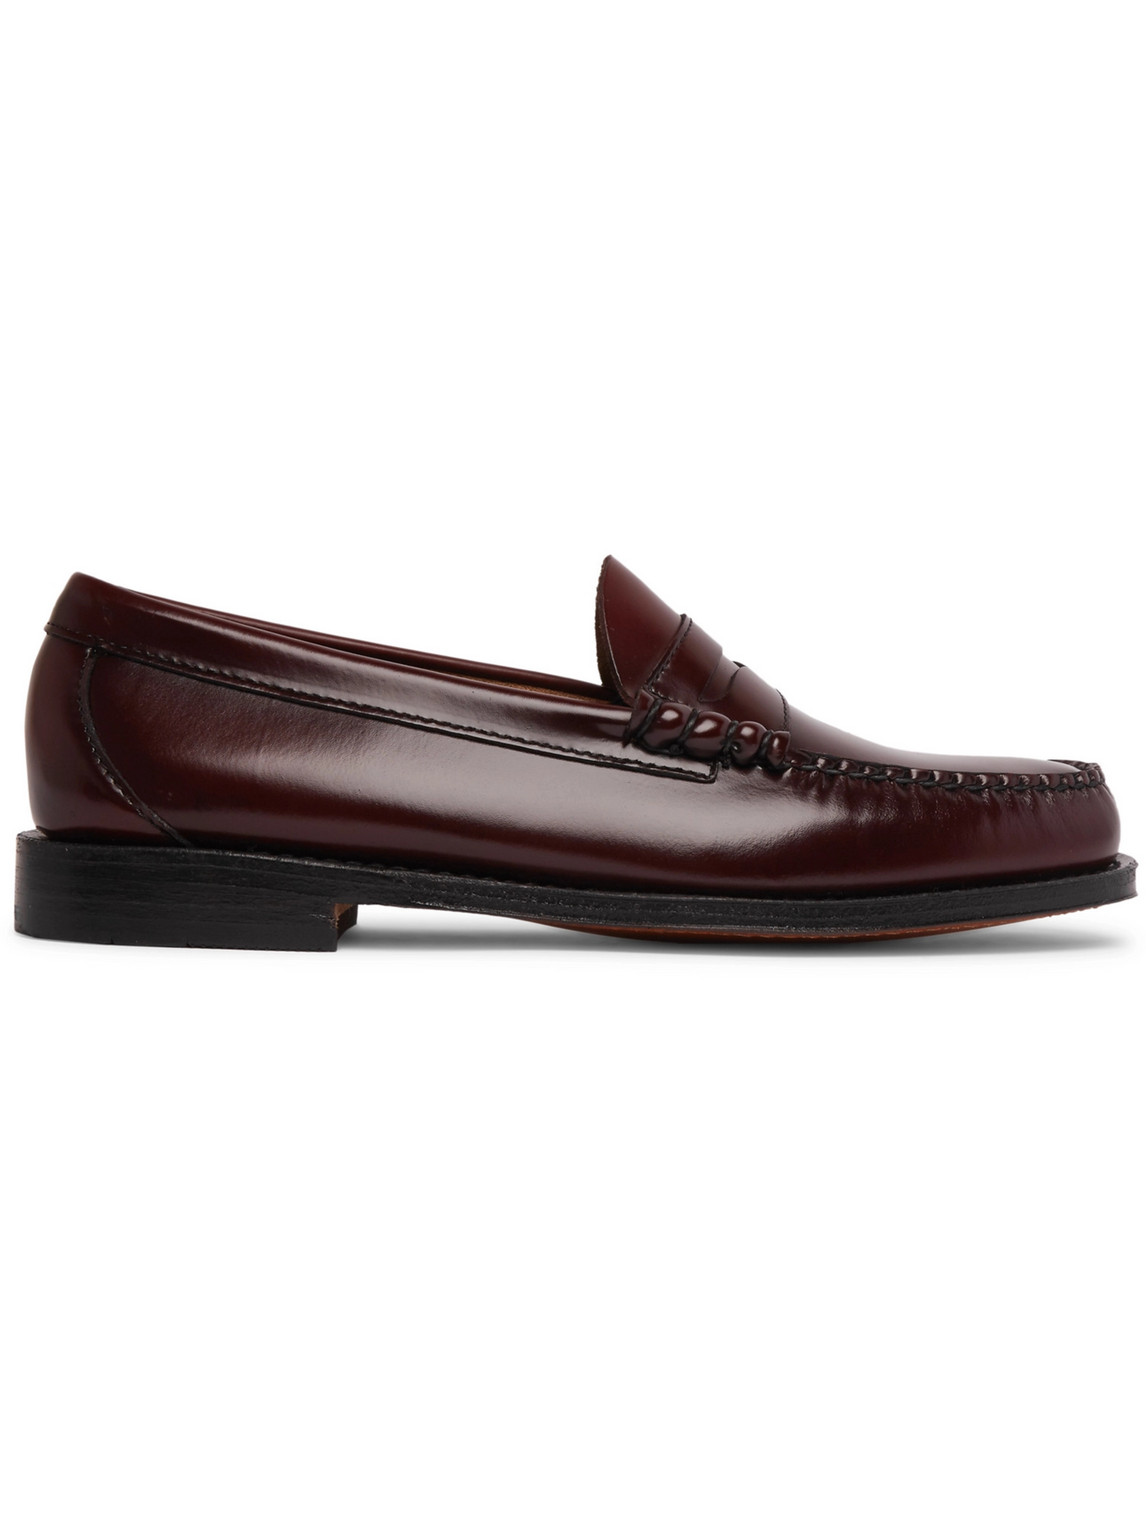 G.H. Bass & Co. - Weejuns Heritage Larson Leather Penny Loafers - Men - Burgundy - UK 6 von G.H. Bass & Co.